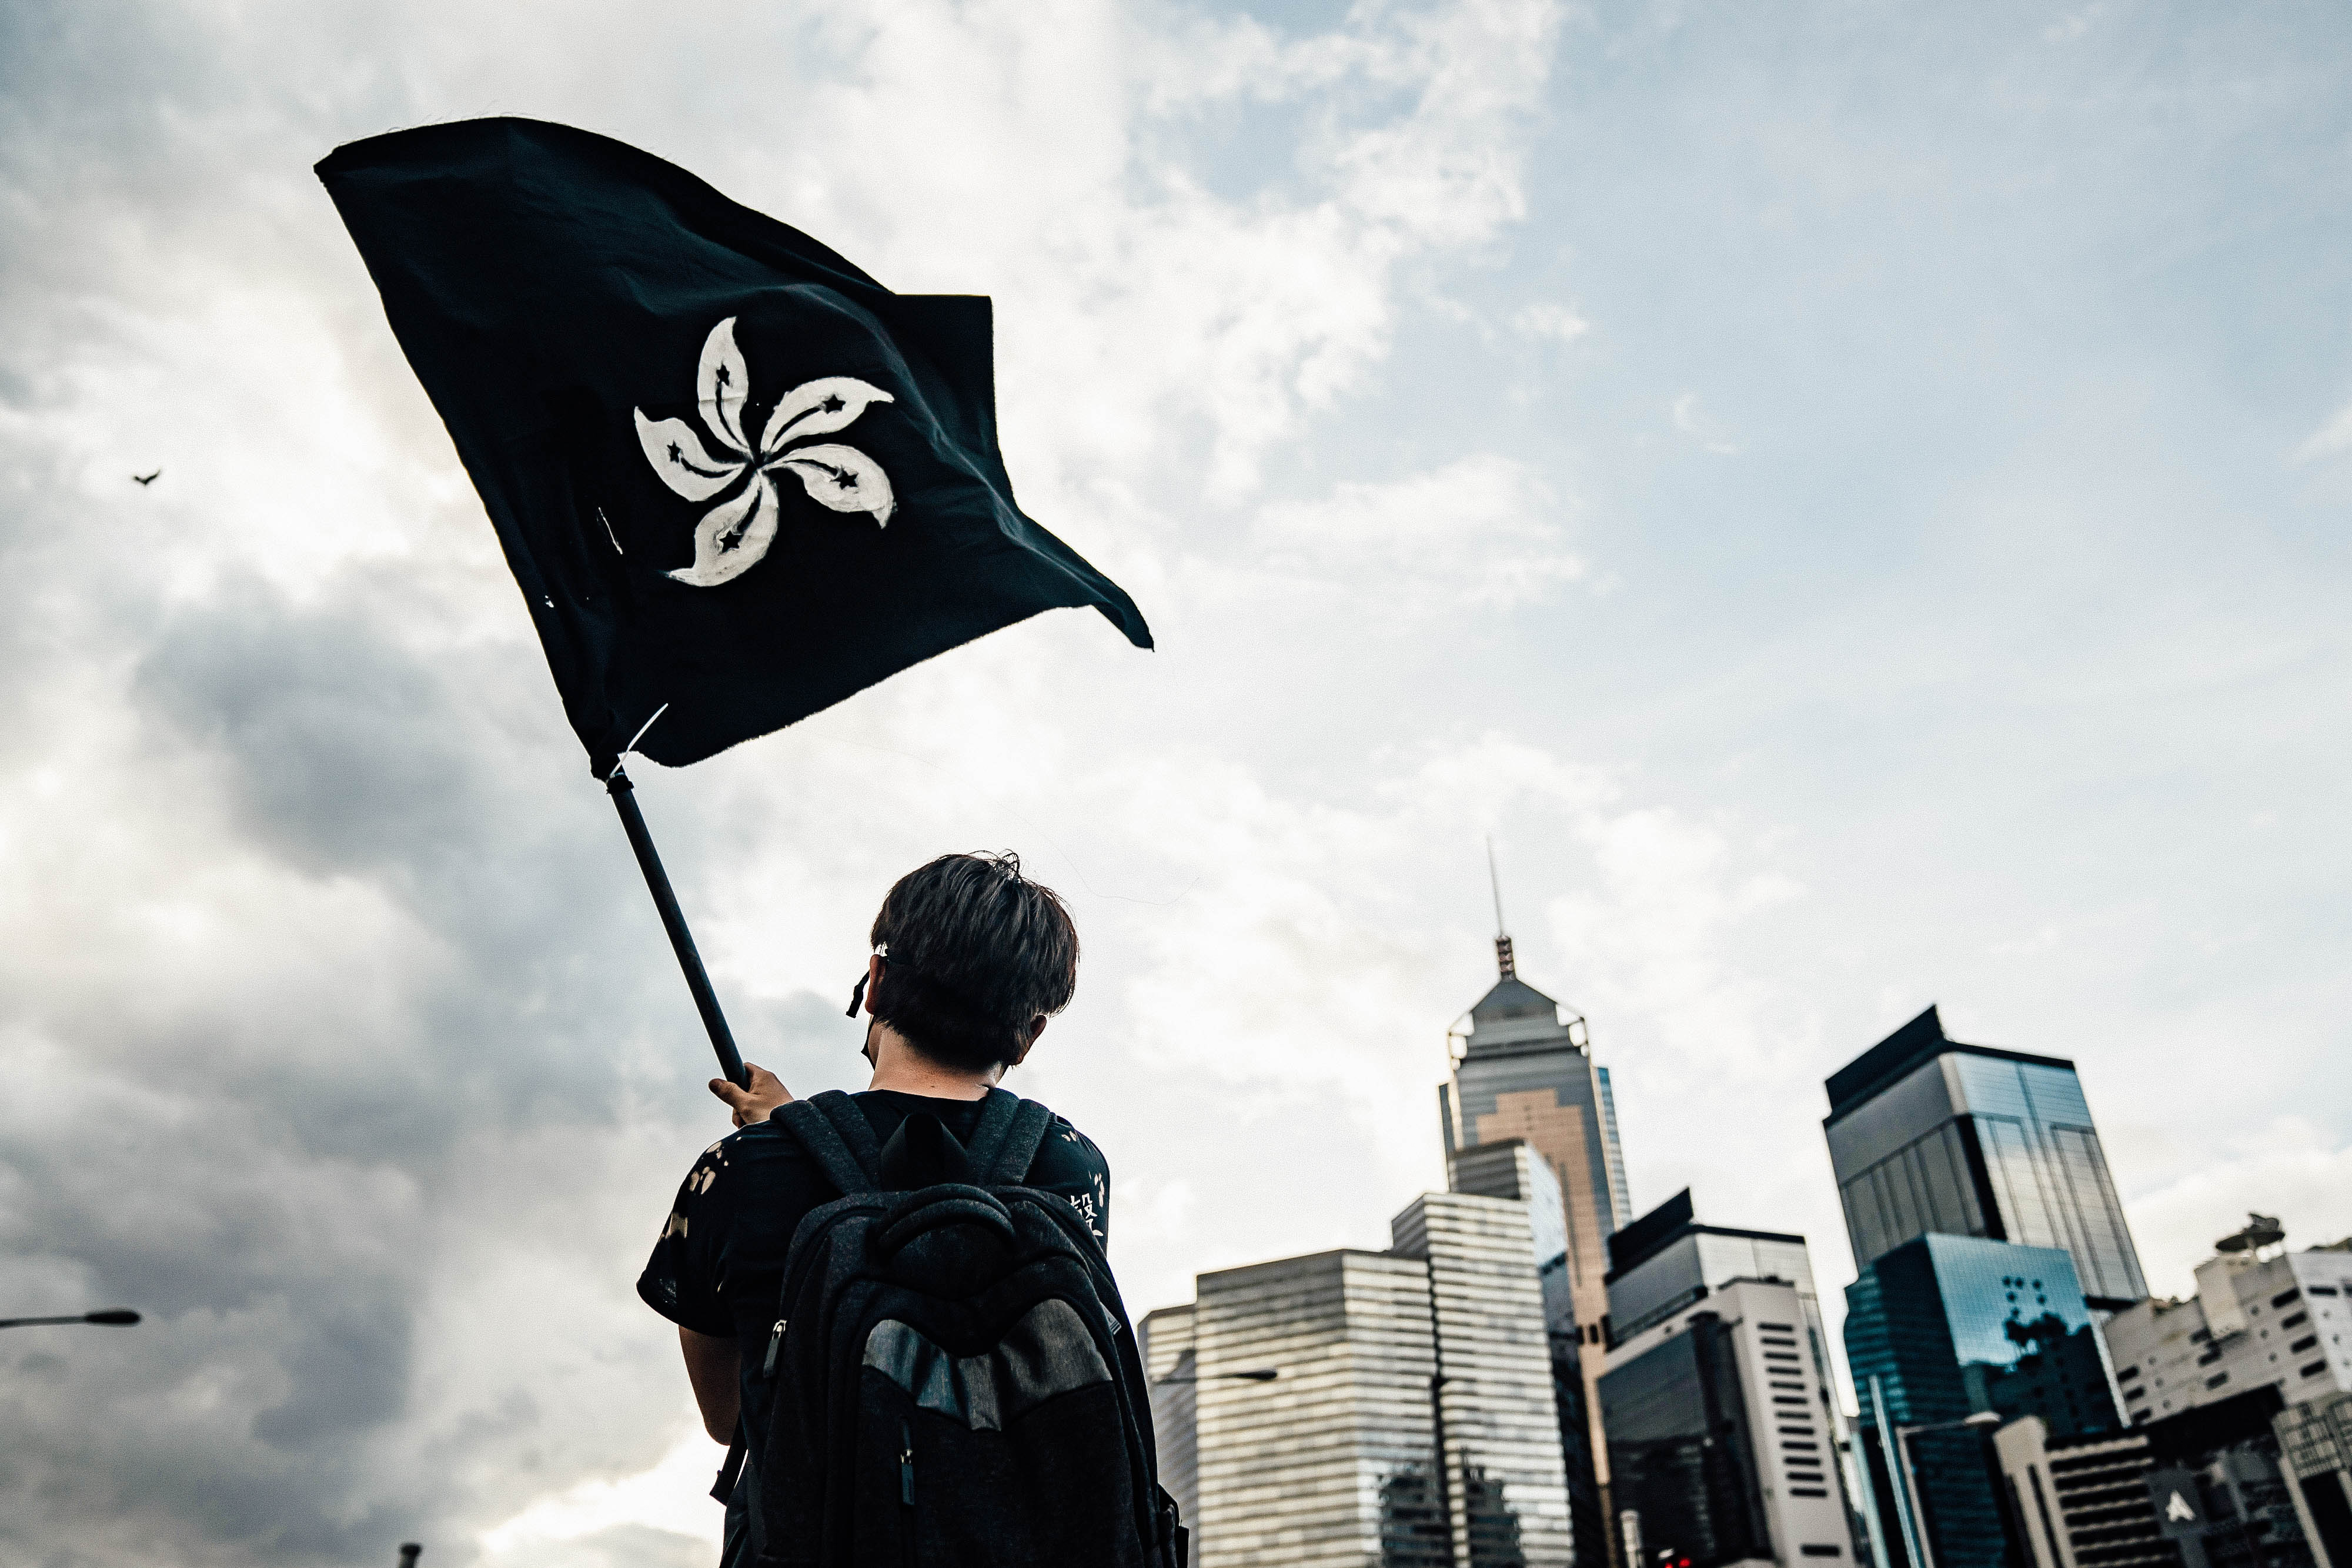 An anti-extradition protester waves a black flag on a street outside the Legislative Council Complex ahead of the annual flag raising ceremony of 22nd anniversary of the city's handover from Britain to China on July 1, 2019 in Hong Kong, China.